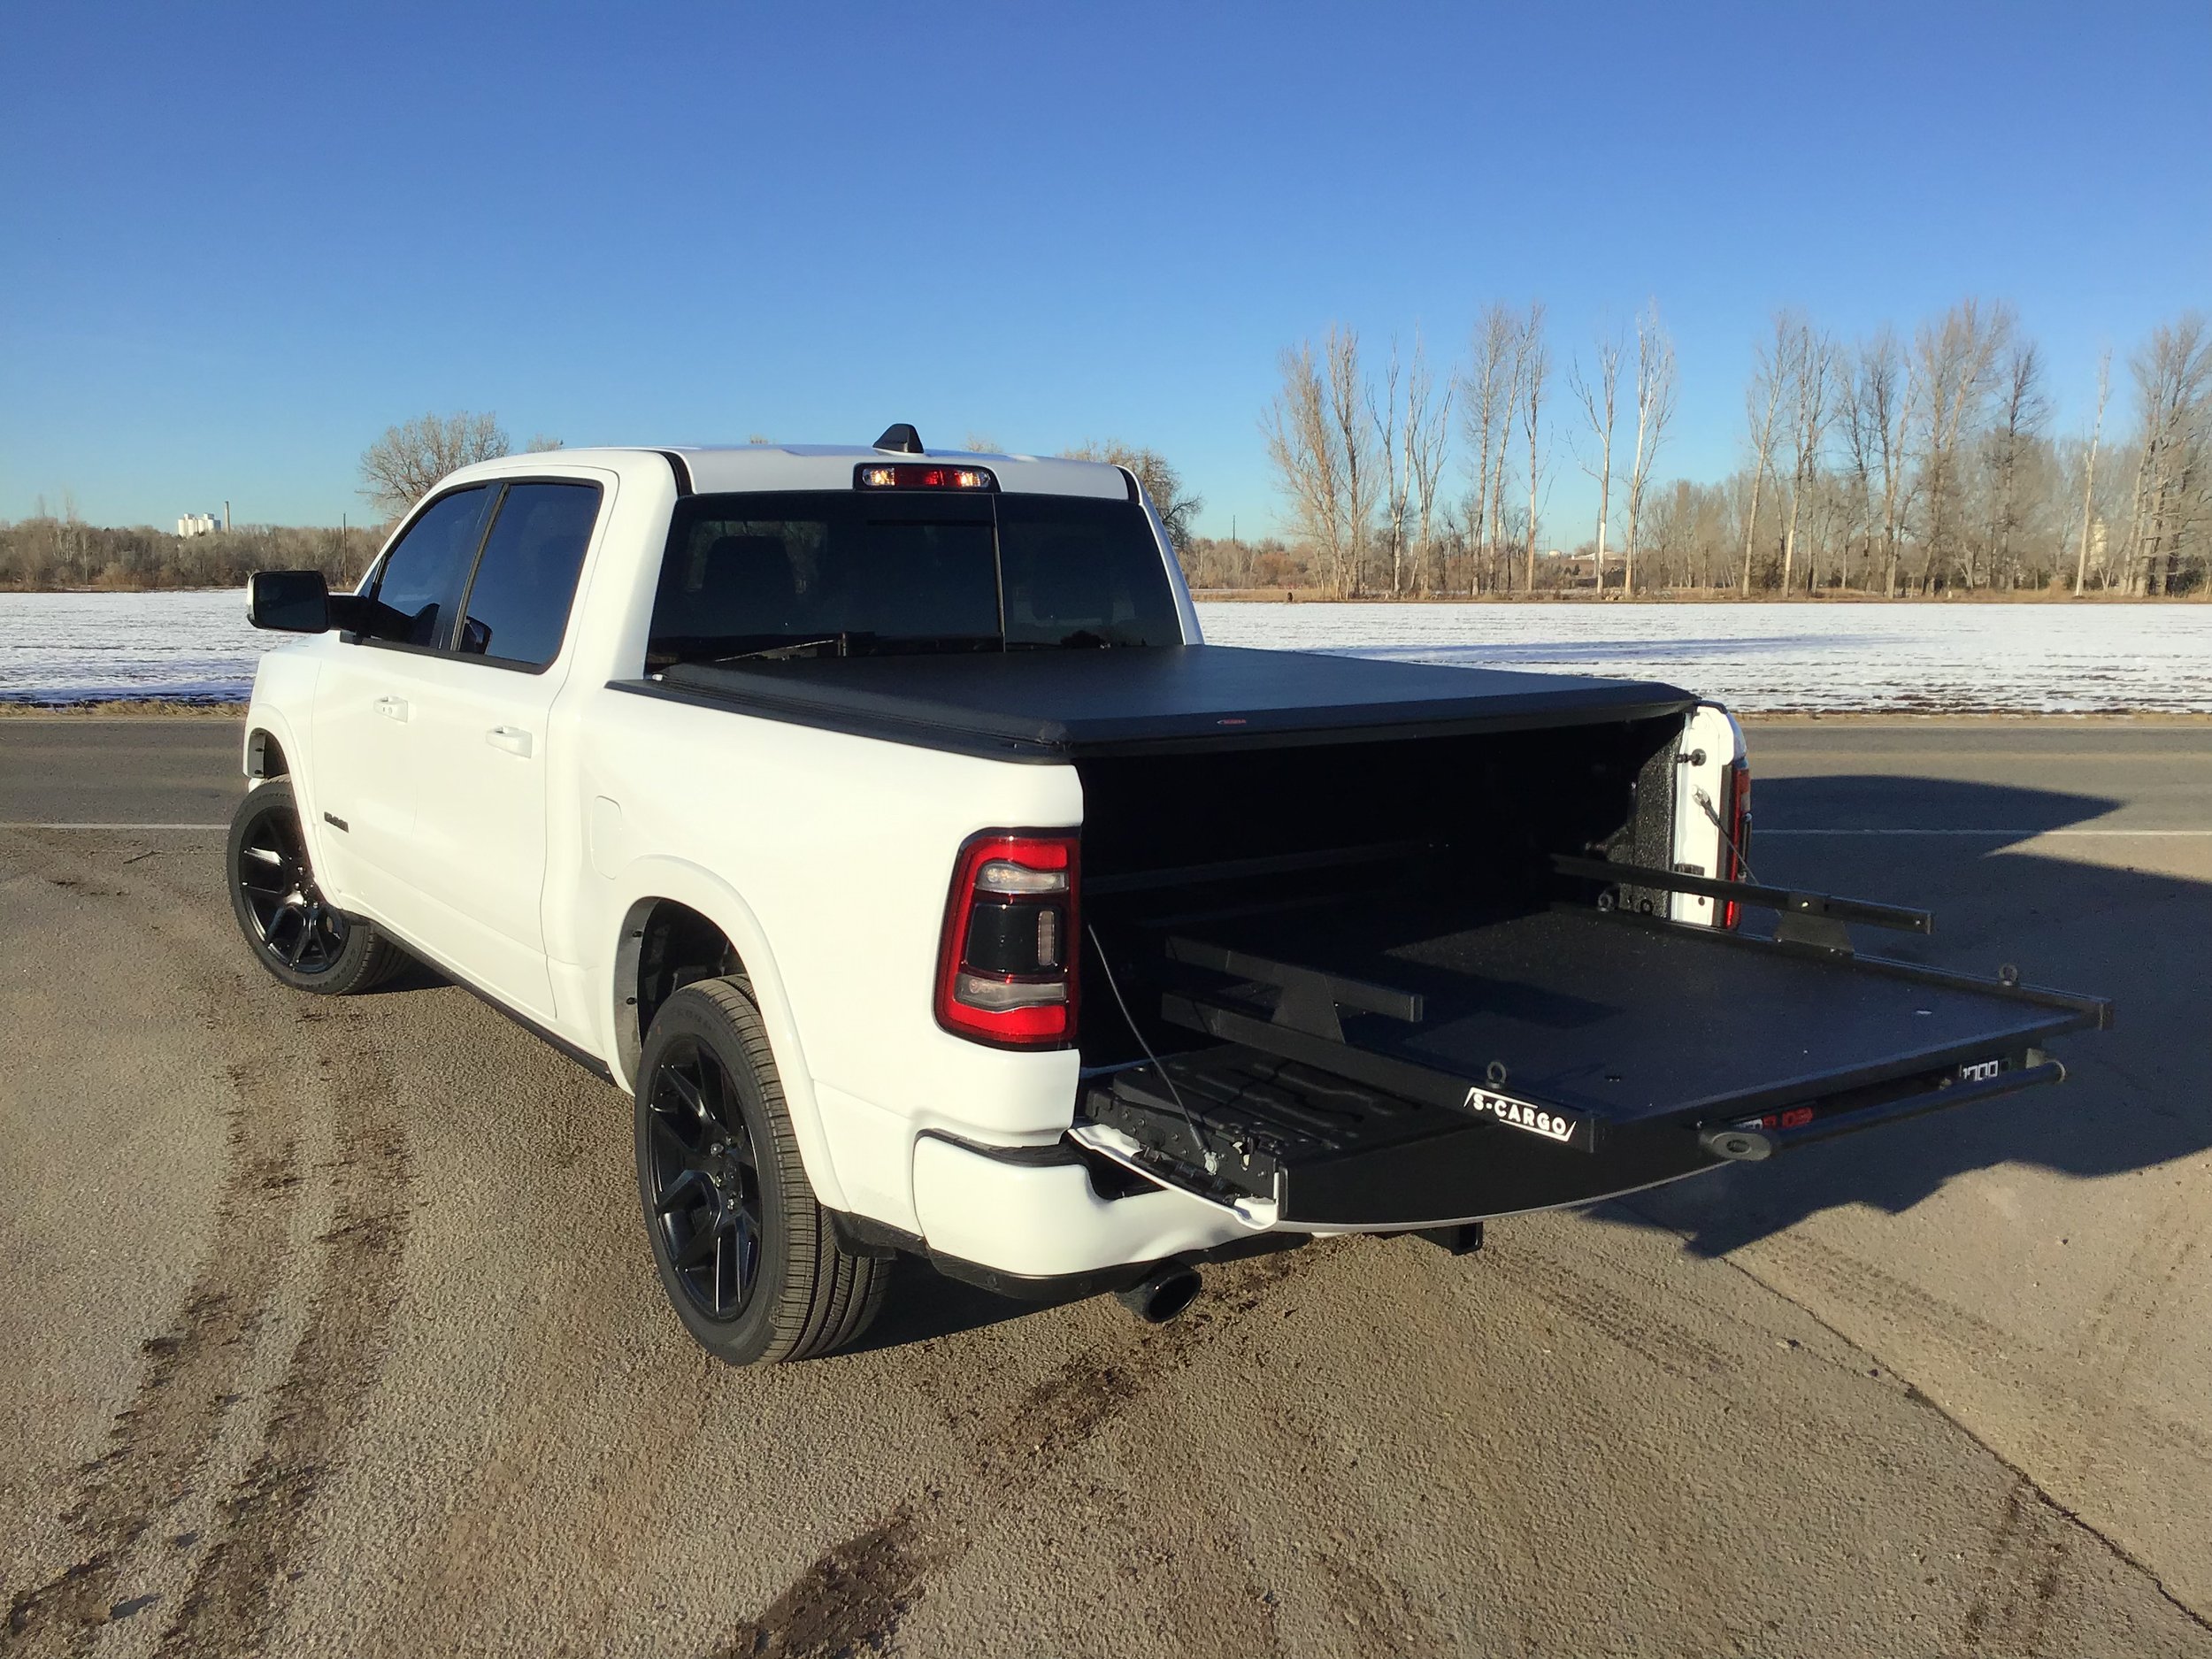 5TH GEN RAM 1500 ACCESS COVER CLASSIC ROLL UP TONNEAU COVER BEDSLIDE MULTI-FUNCTION TAILGATE S-CARGO TRUCK CAPS LOVELAND COLORADO 2.JPG